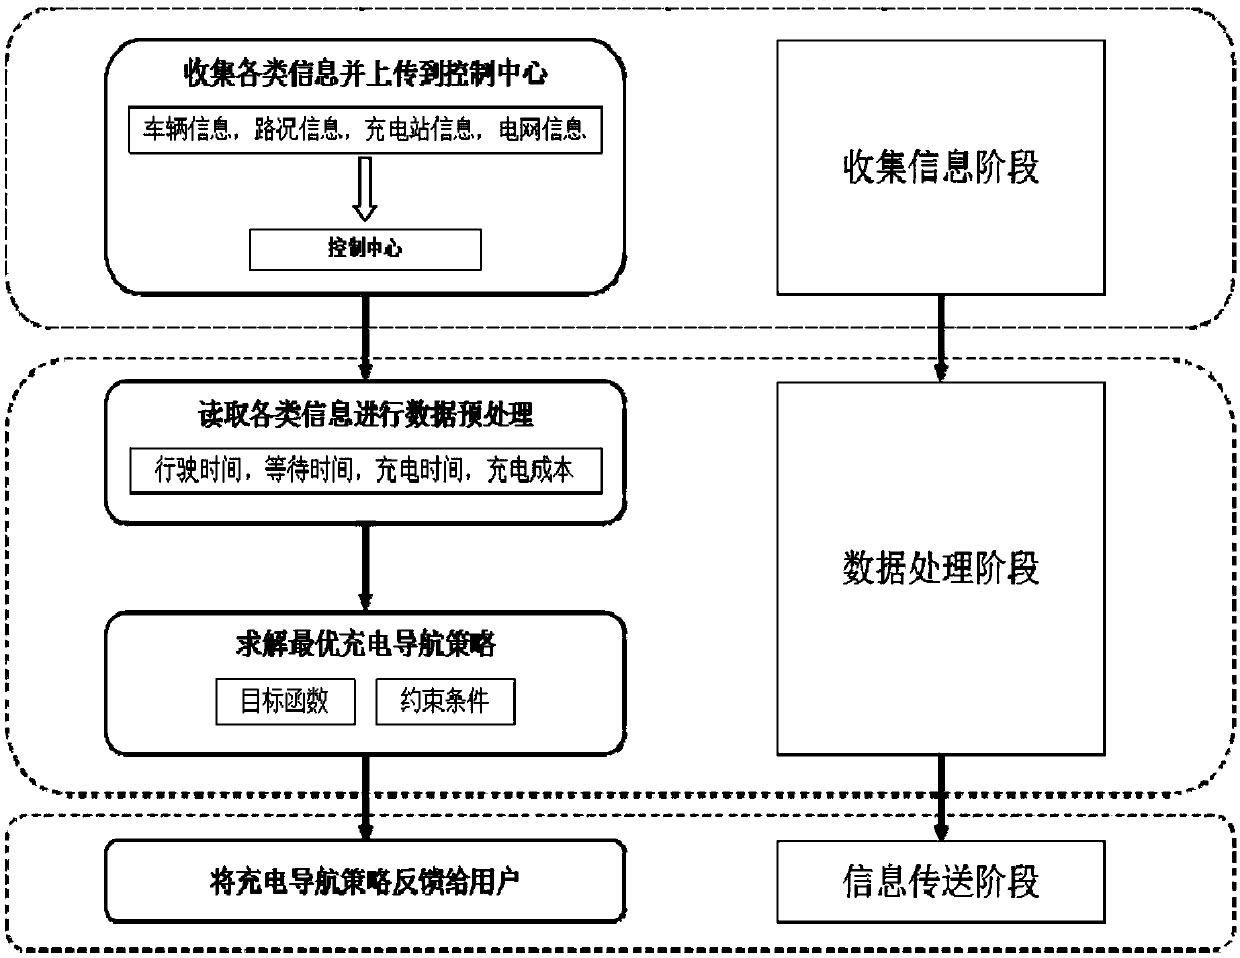 Electric vehicle charging navigation method considering power grid information and charging station information